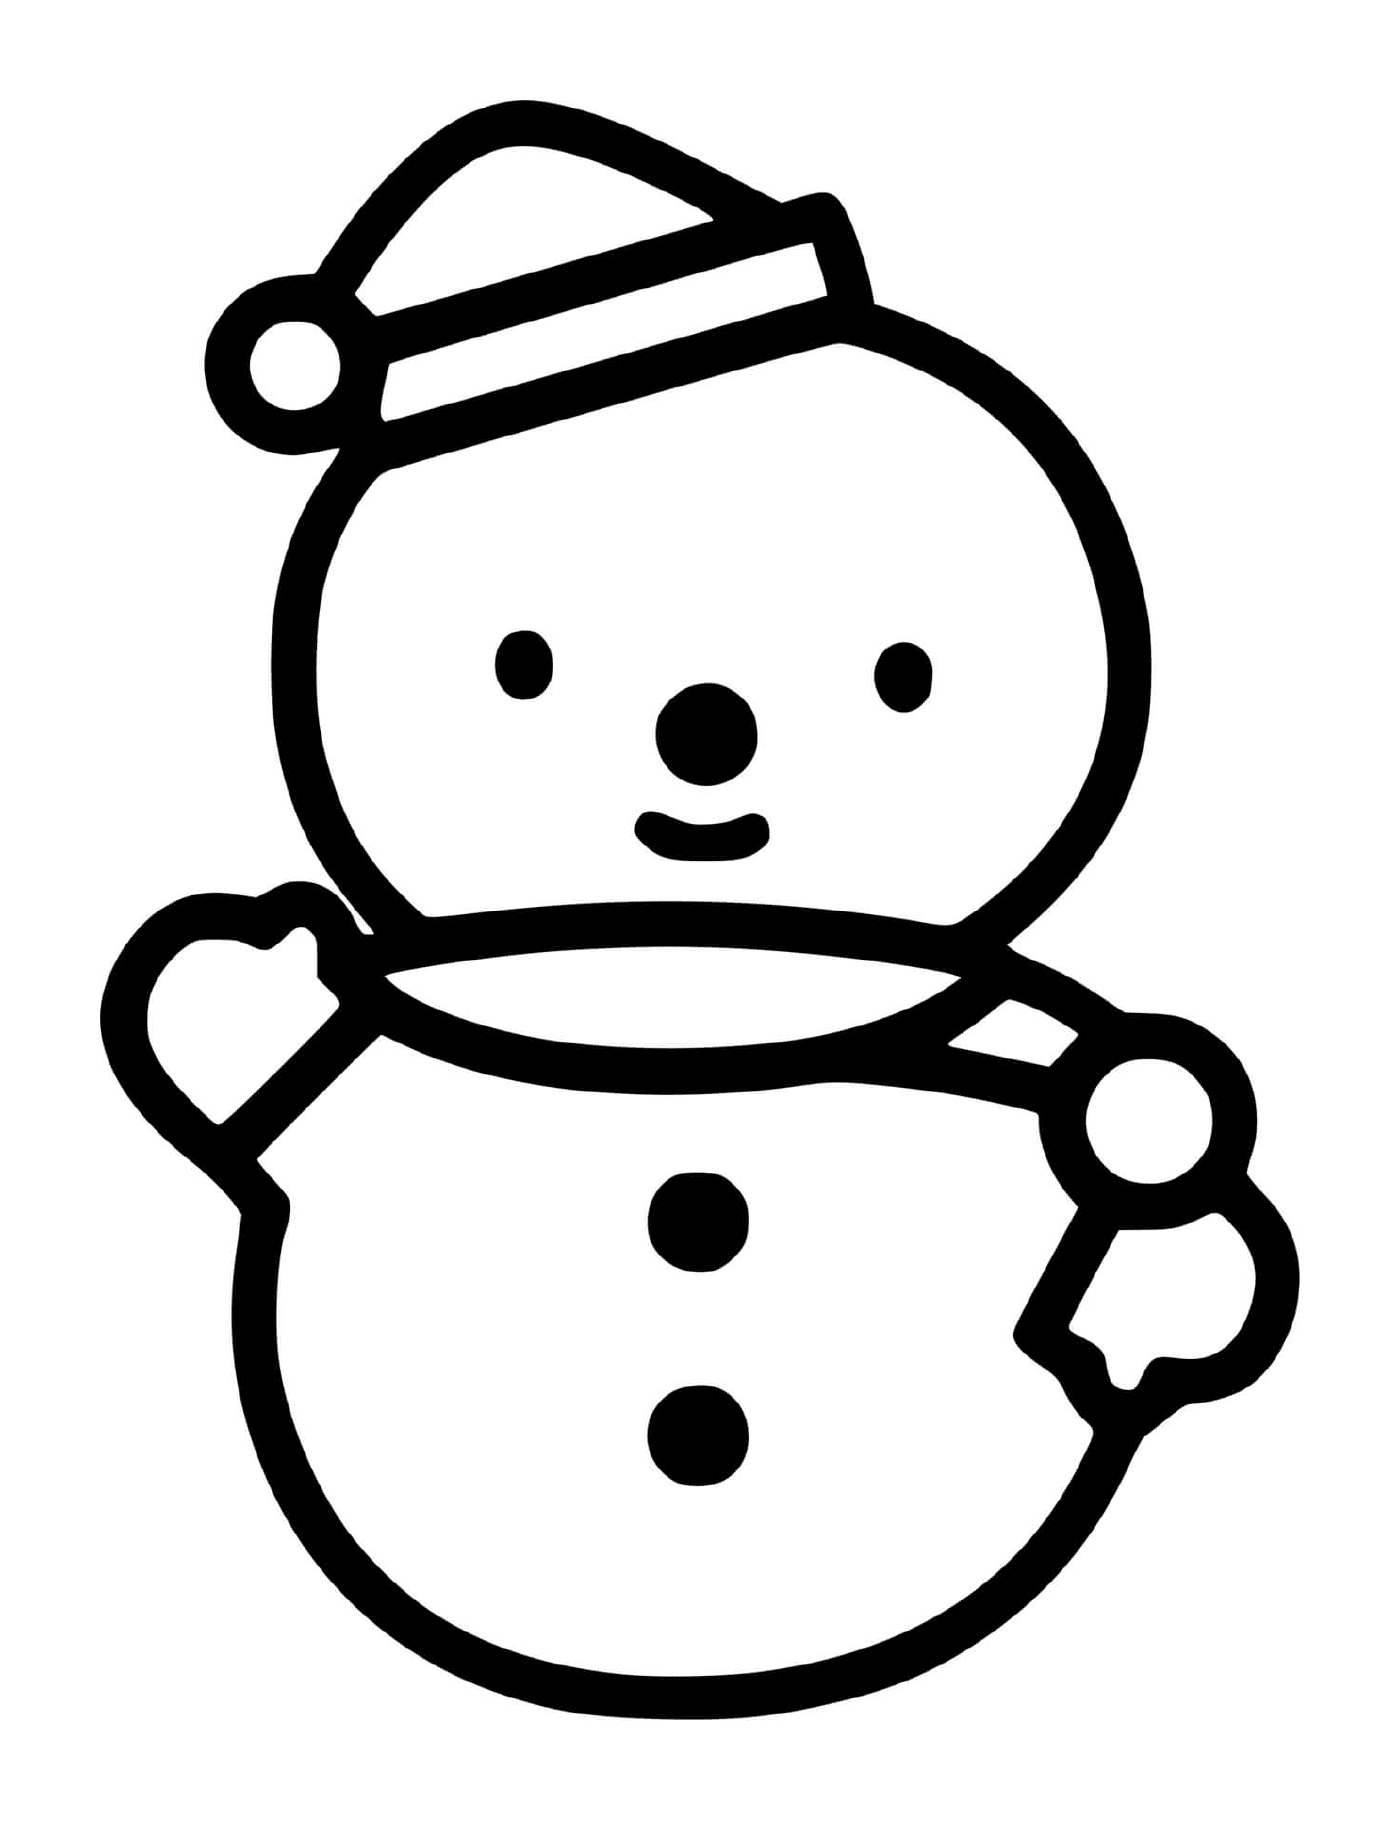  A snowman easy to draw 